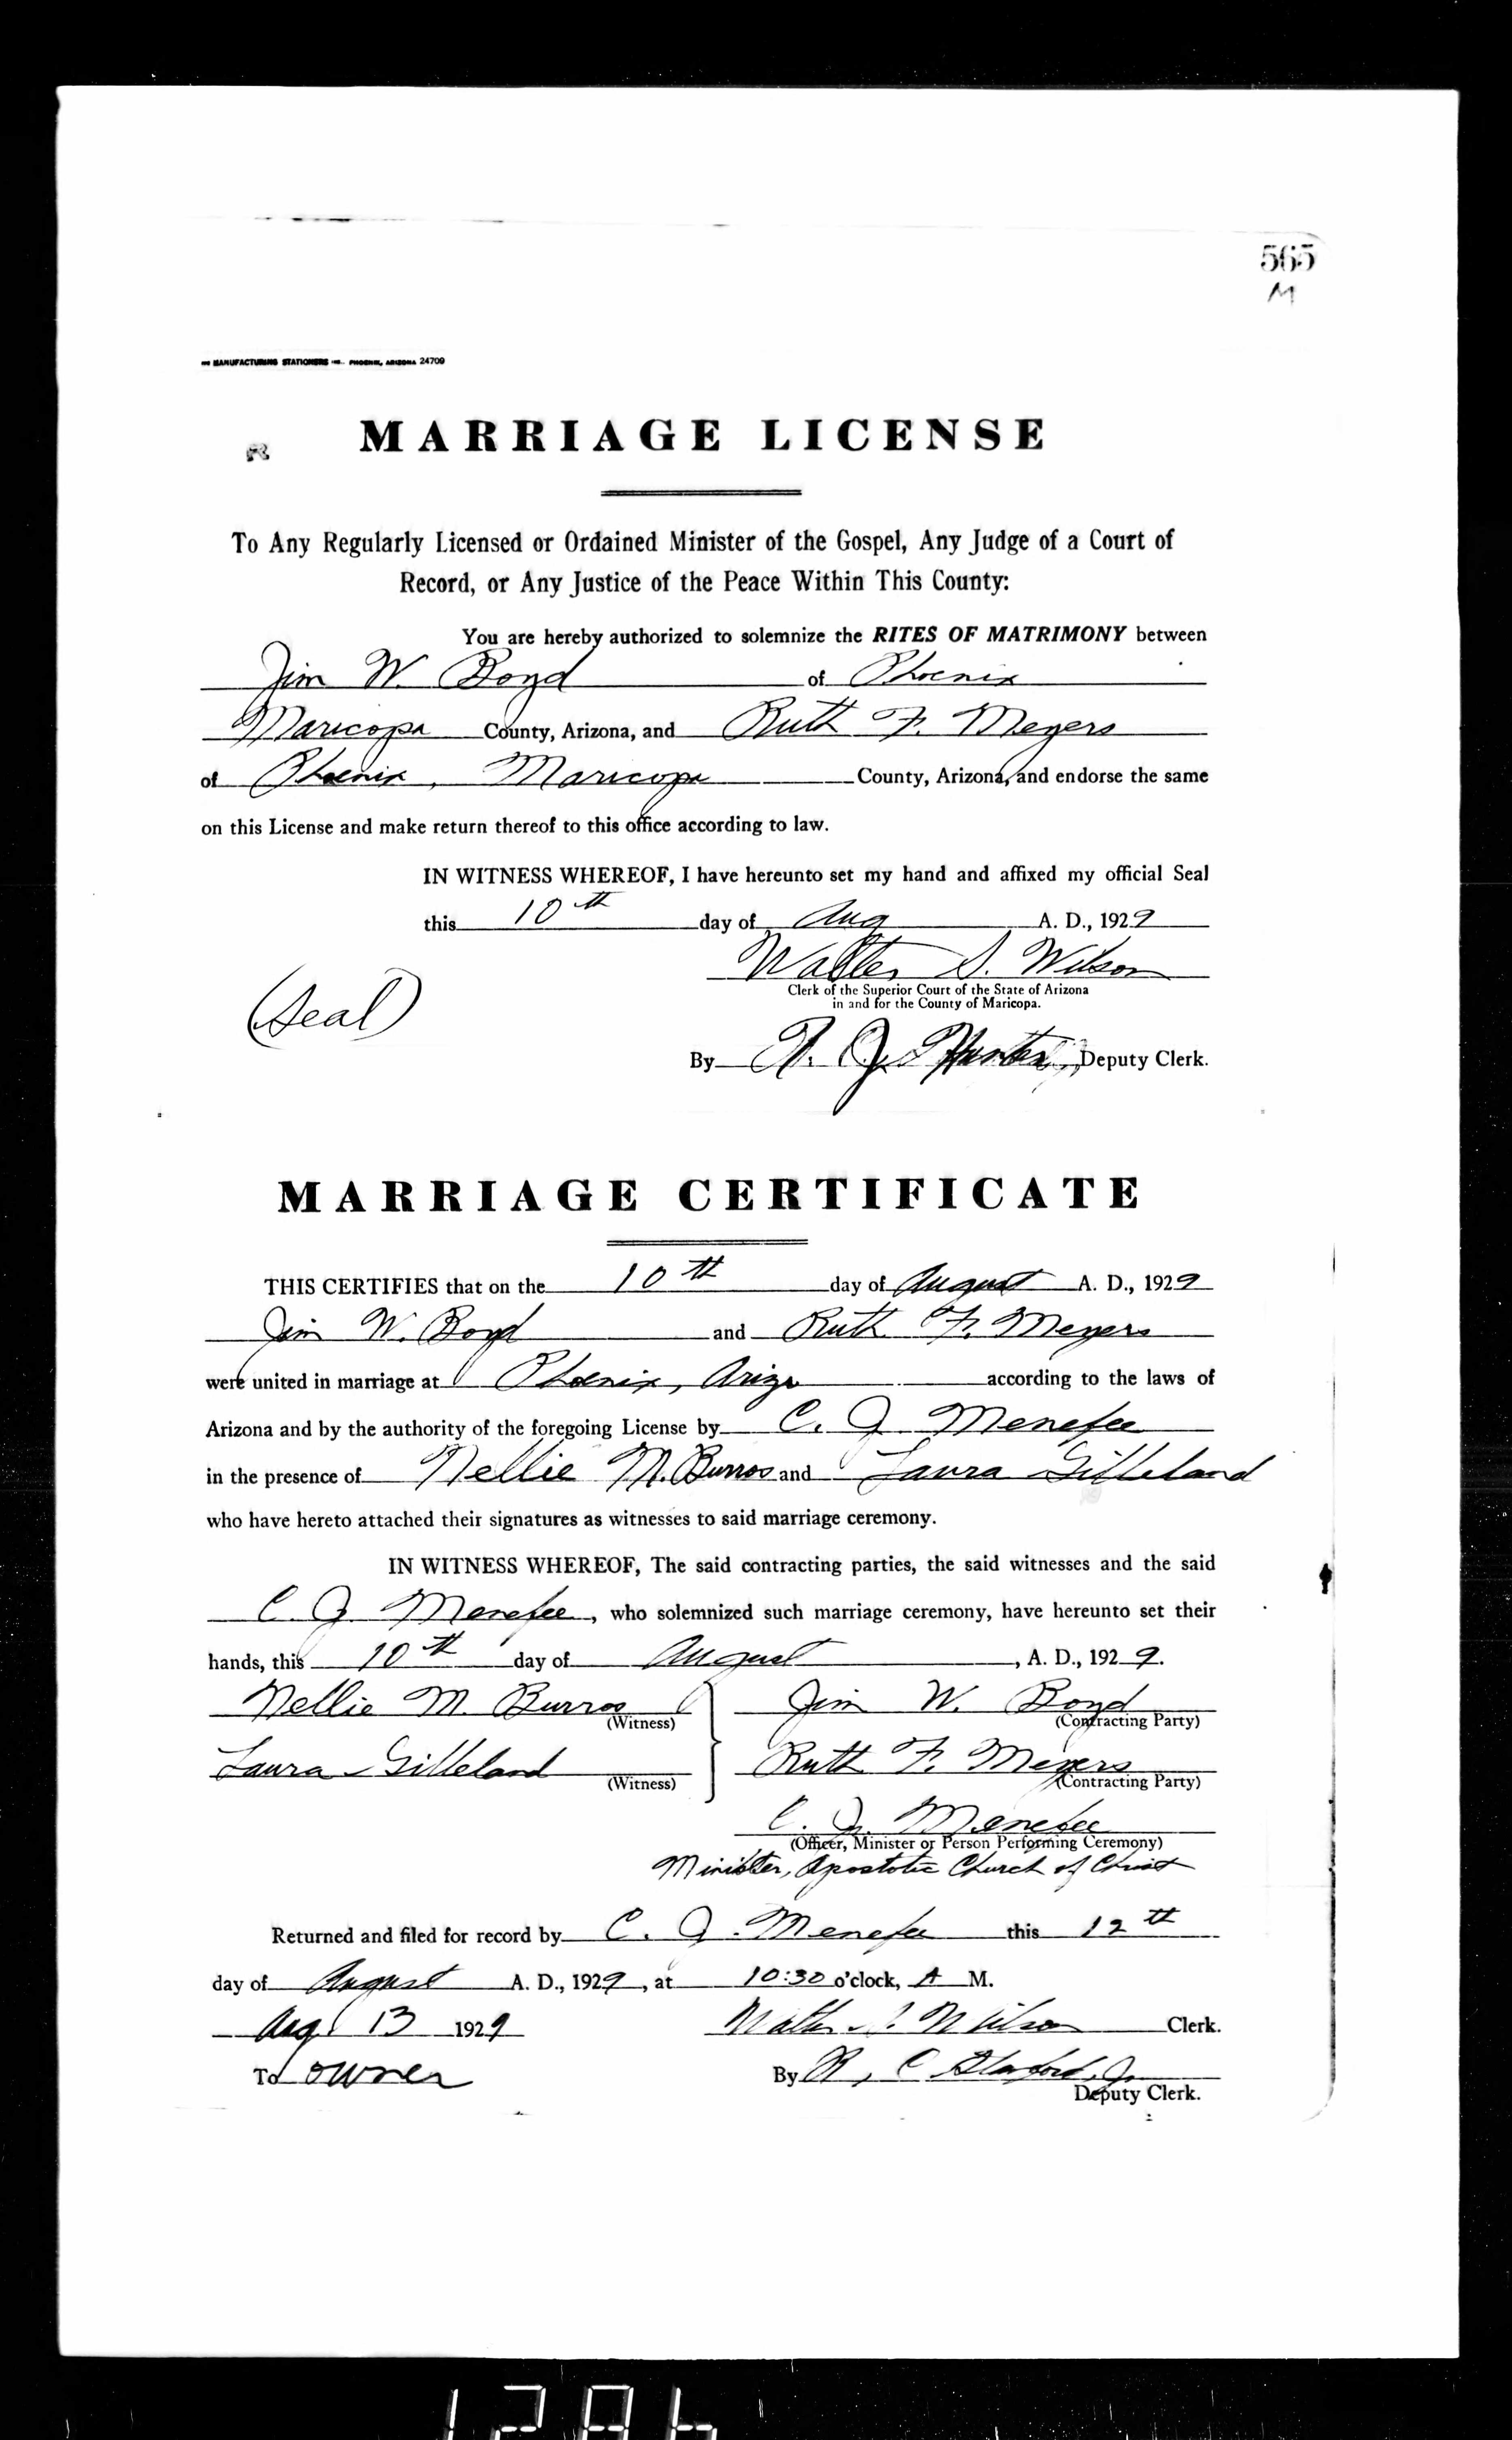 Marriage license and certificate of Jim W. Boyd and Ruth F. Meyers